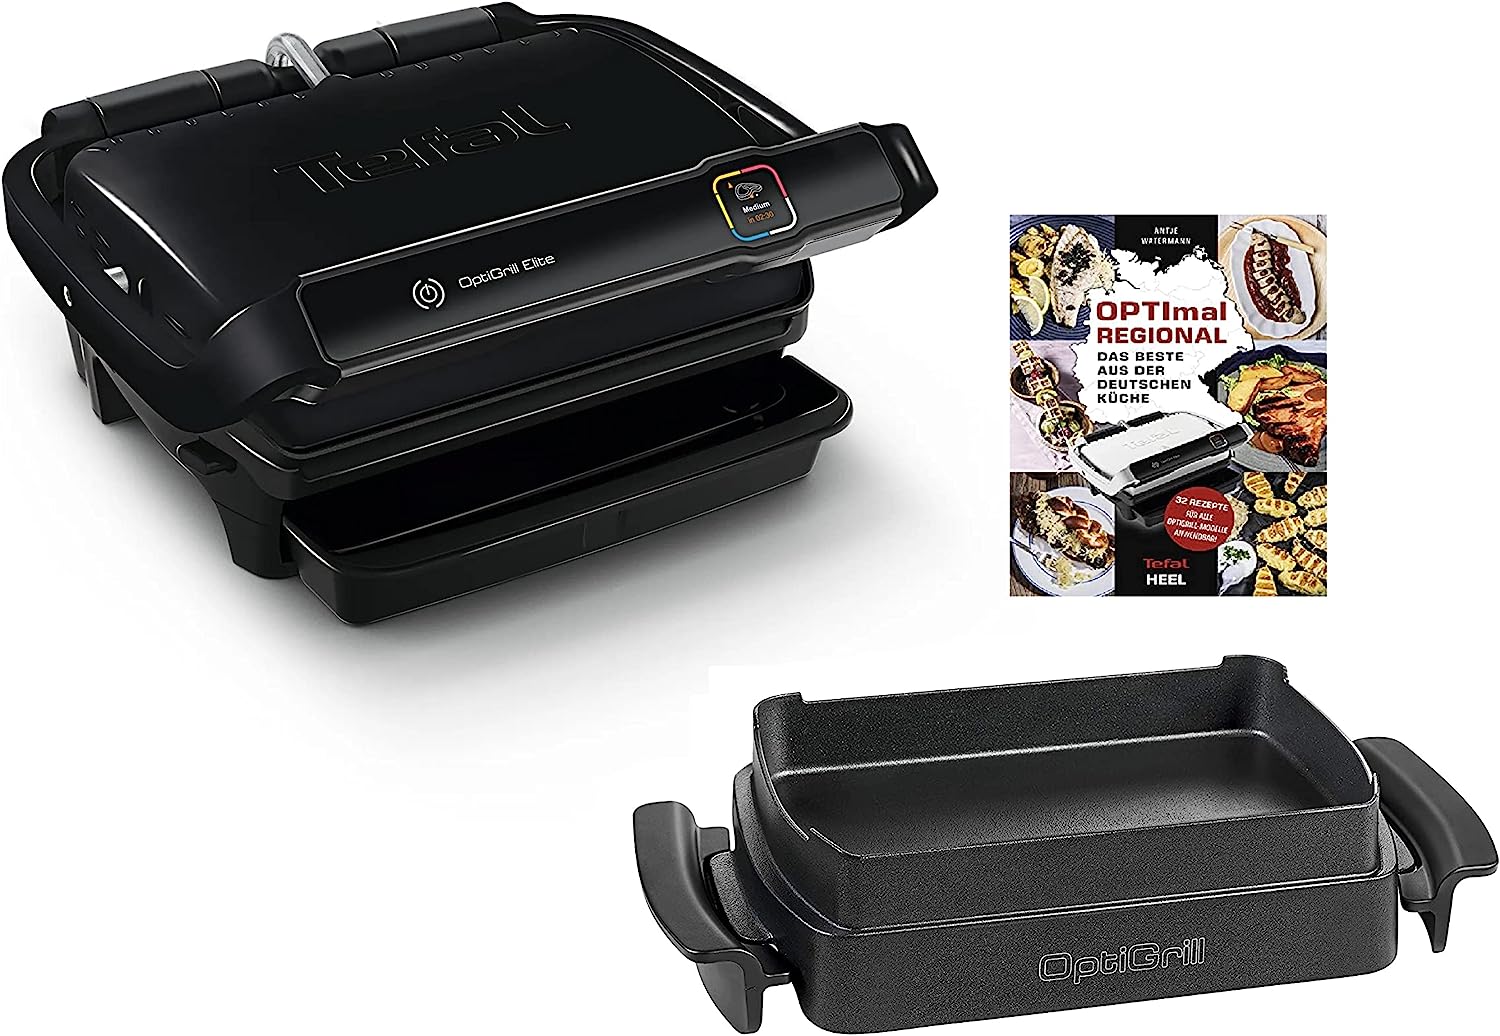 Tefal Optigrill Elite Contact Grill I 2000 Watt I With Snacking & Baking Baking Bowl + Recipe Book I Indoor & Outdoor Grill I 12 Automatic Programs I Touch Display I Stainless Steel I Ideal Grilling Results